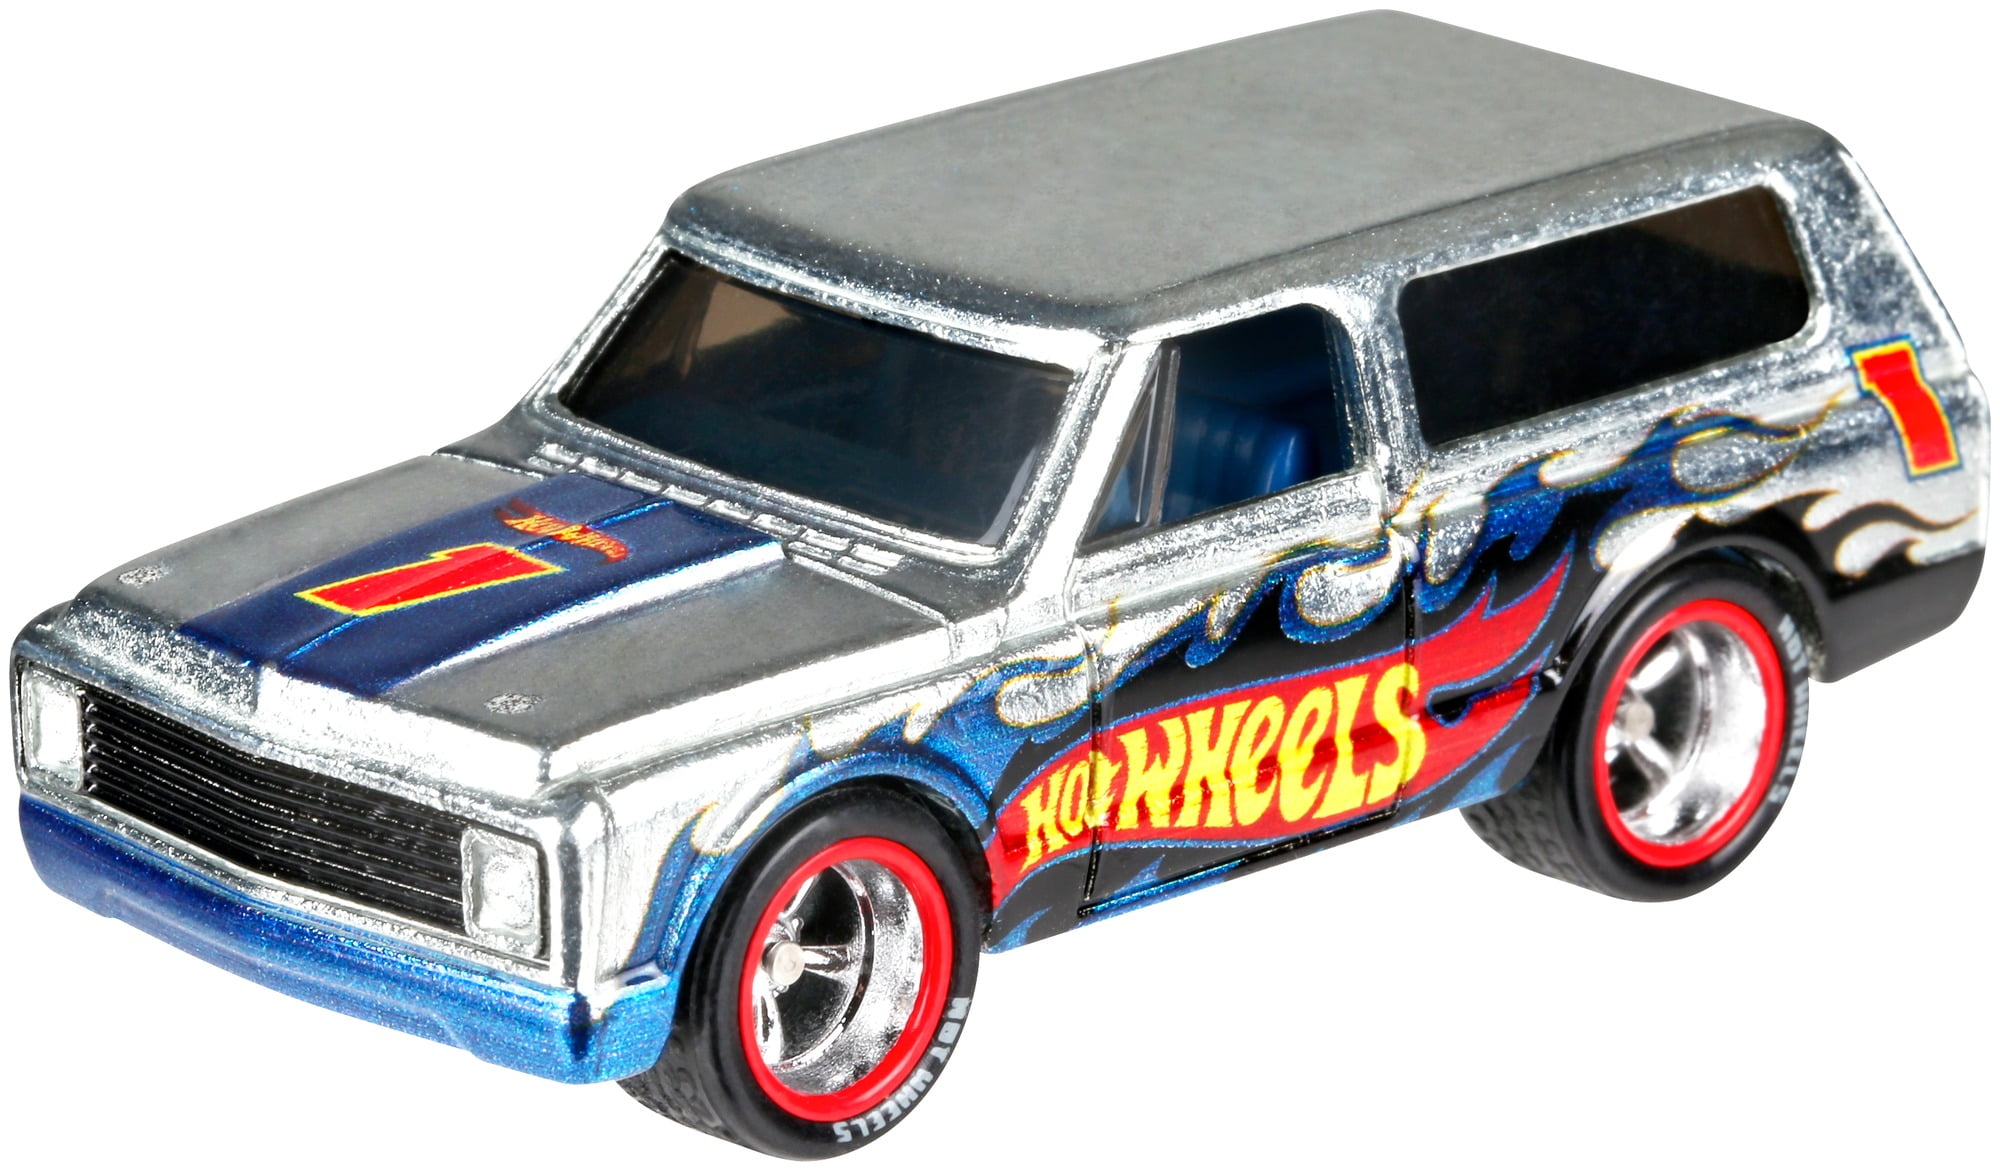 Hot Wheels 2018 Collectors Edition 70 Chevy Blazer Toy Car NEW 